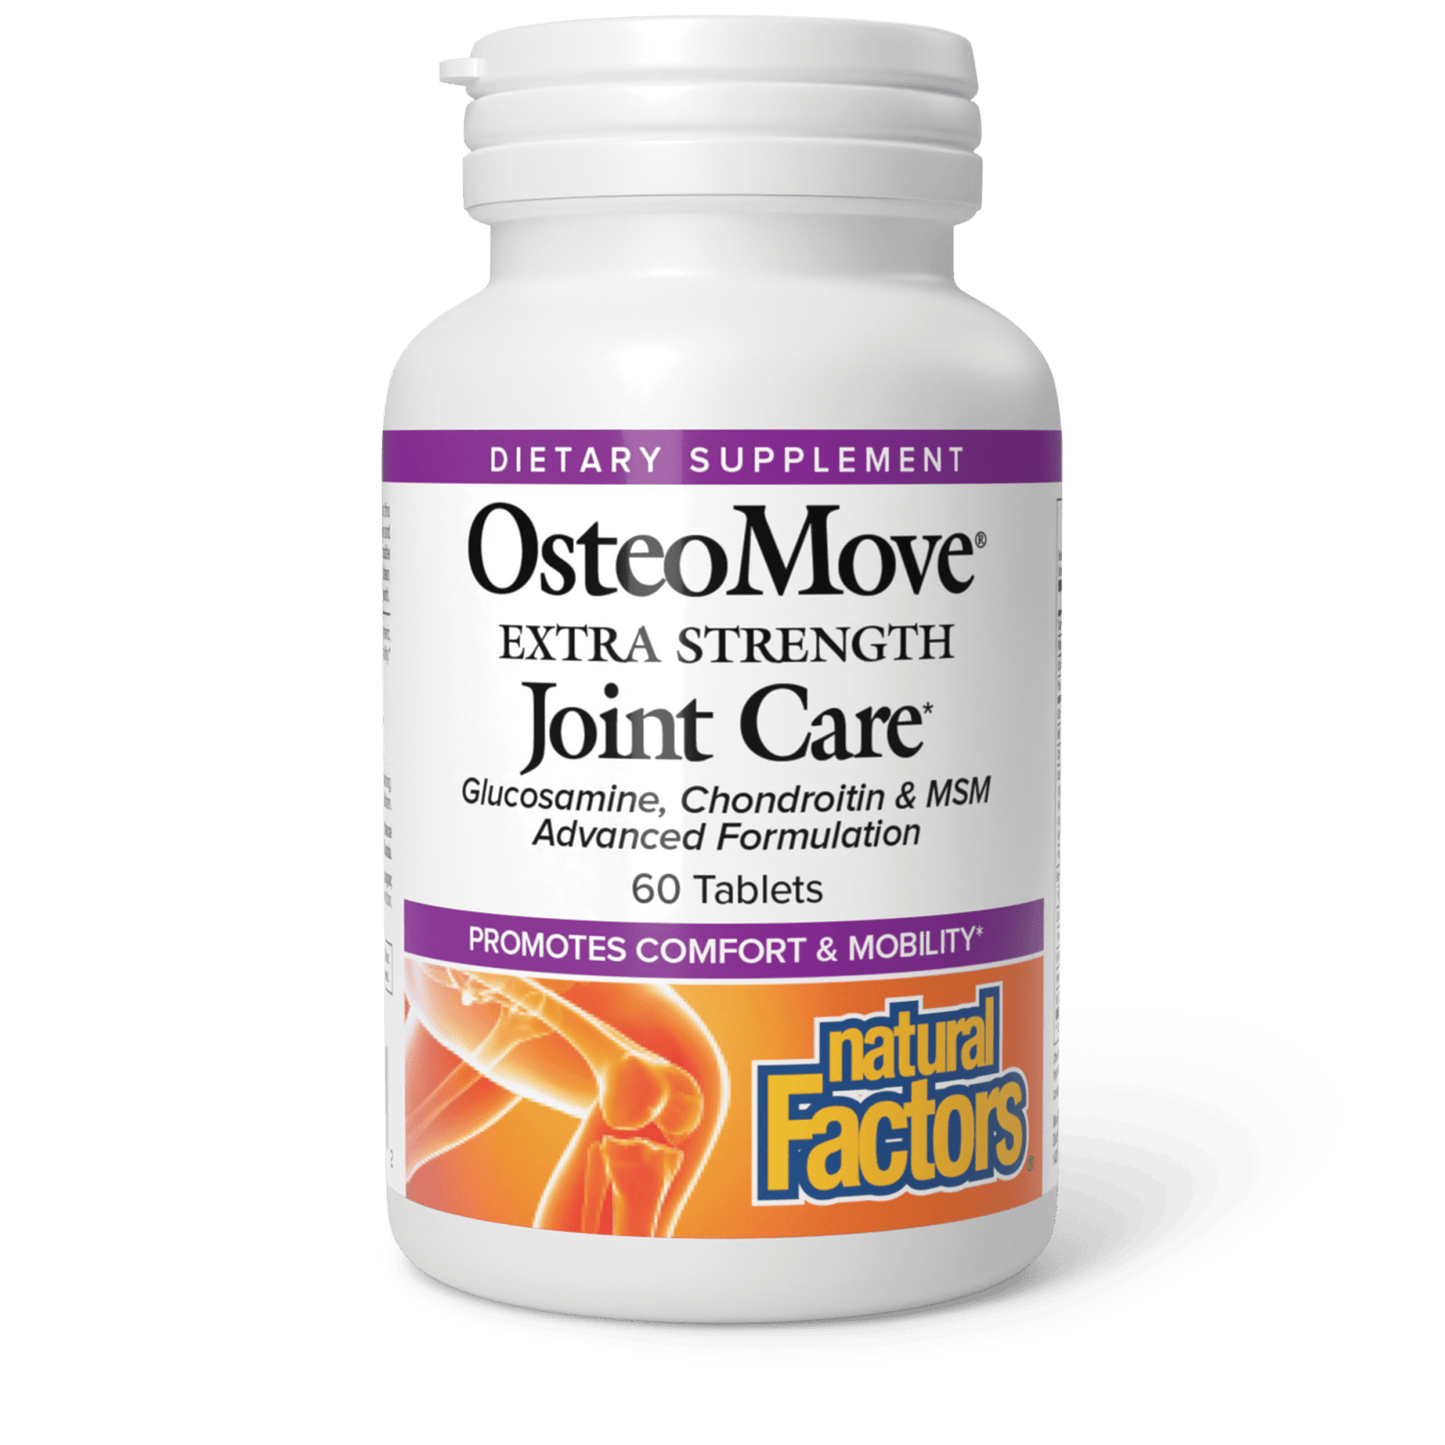 OsteoMove® Extra Strength Joint Care*|variant|hi-res|26842U